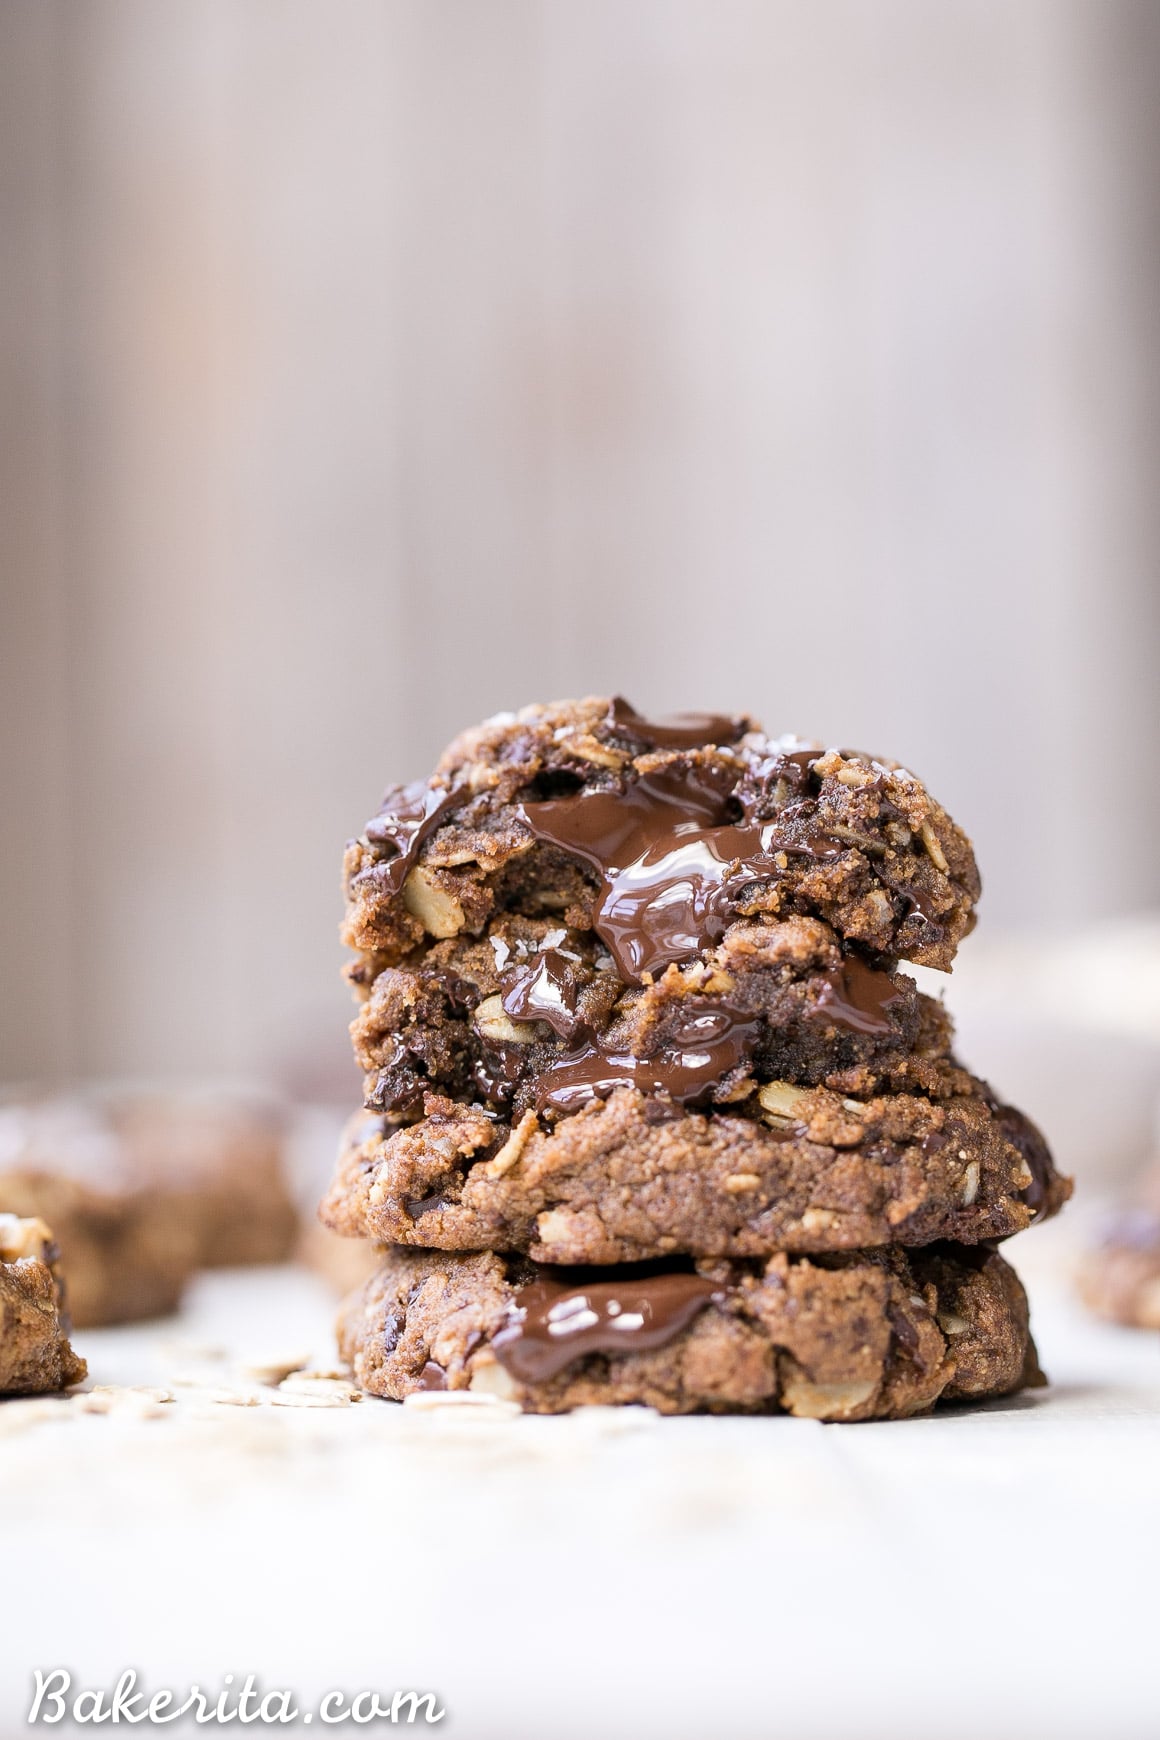 These Oatmeal Chocolate Chip Cookies are gooey in the center with crispy edges and big chocolate chunks, just as the best cookies are! These delicious cookies are gluten-free, refined sugar free, and vegan. 